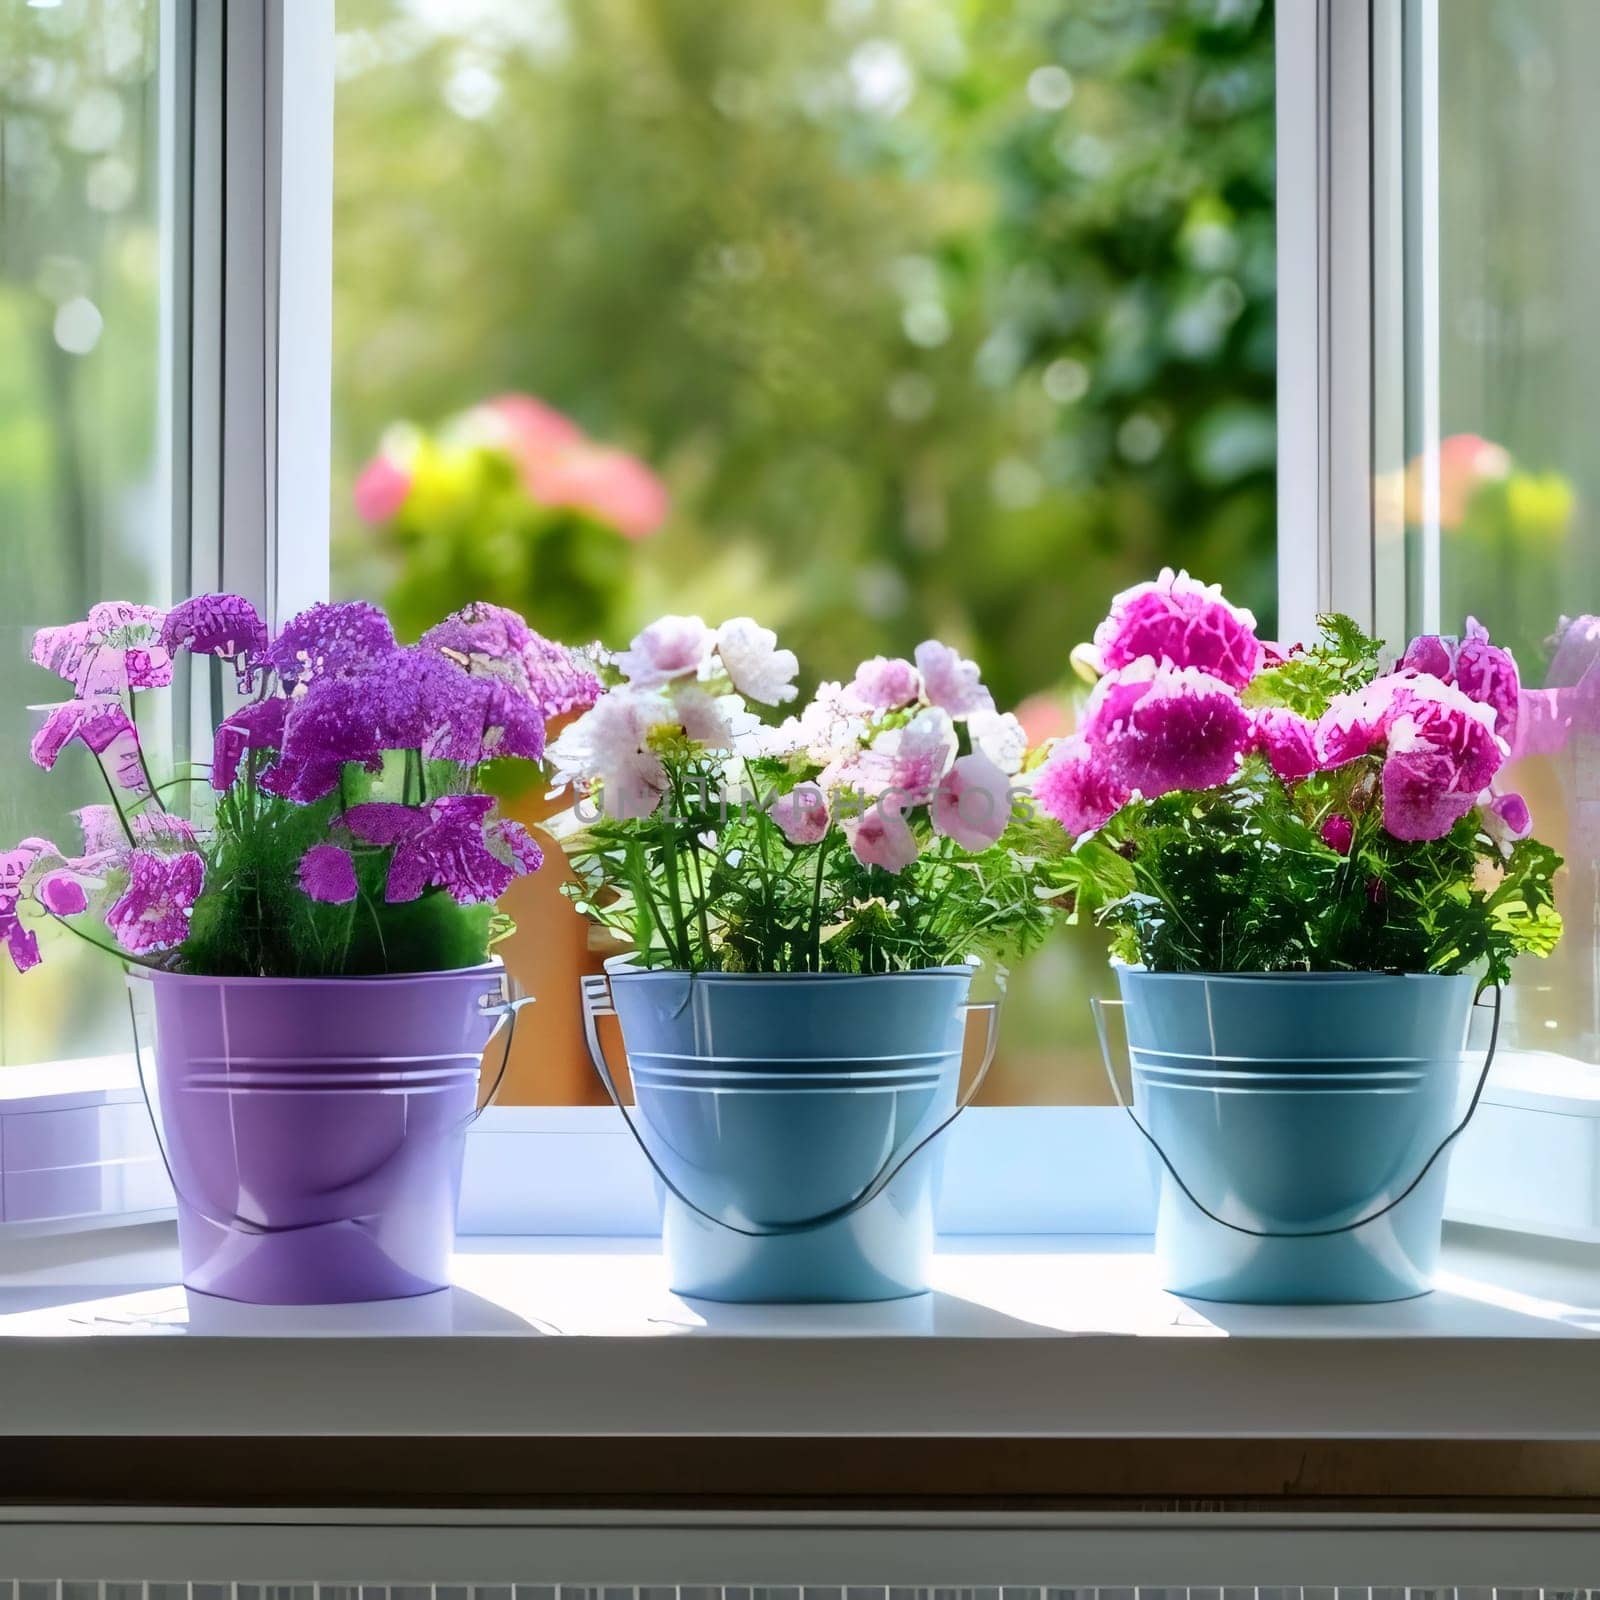 Colorful flowers in small buckets, on the windowsill, window in the background. Flowering flowers, a symbol of spring, new life. by ThemesS